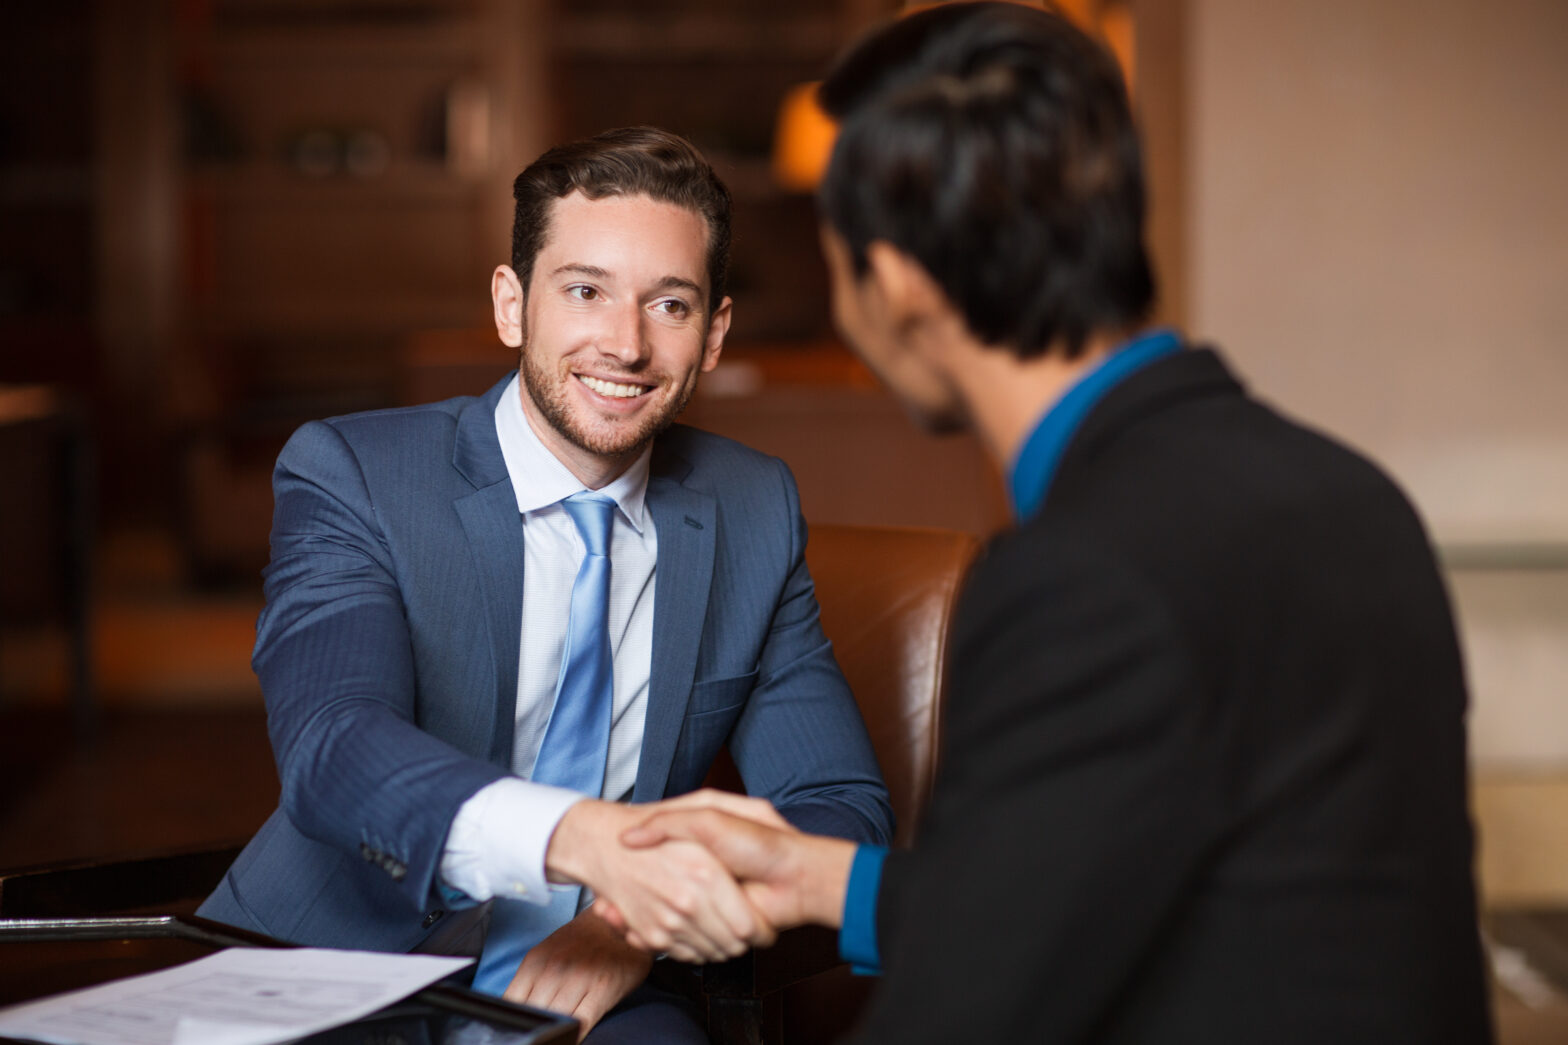 Marketing agency owner and client smiling and shaking hands